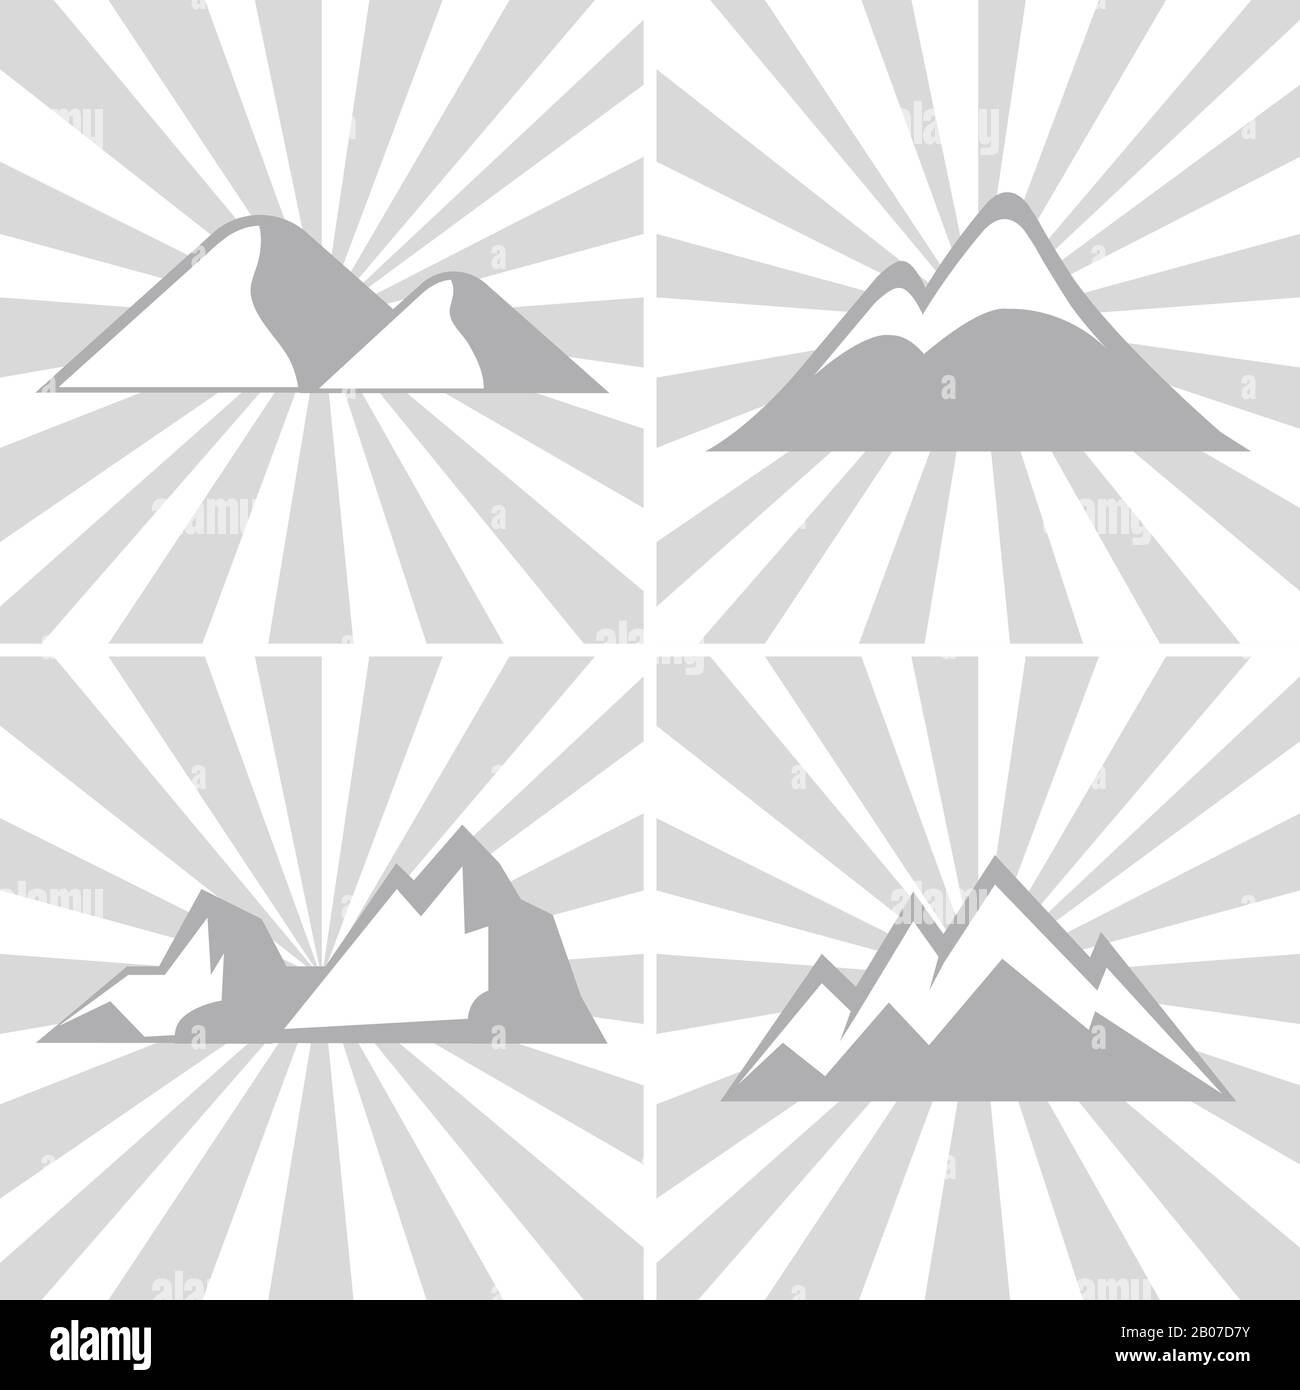 Mountain gray icons on striped background. Mountaineering and climbing emblems. Vector illustration Stock Vector